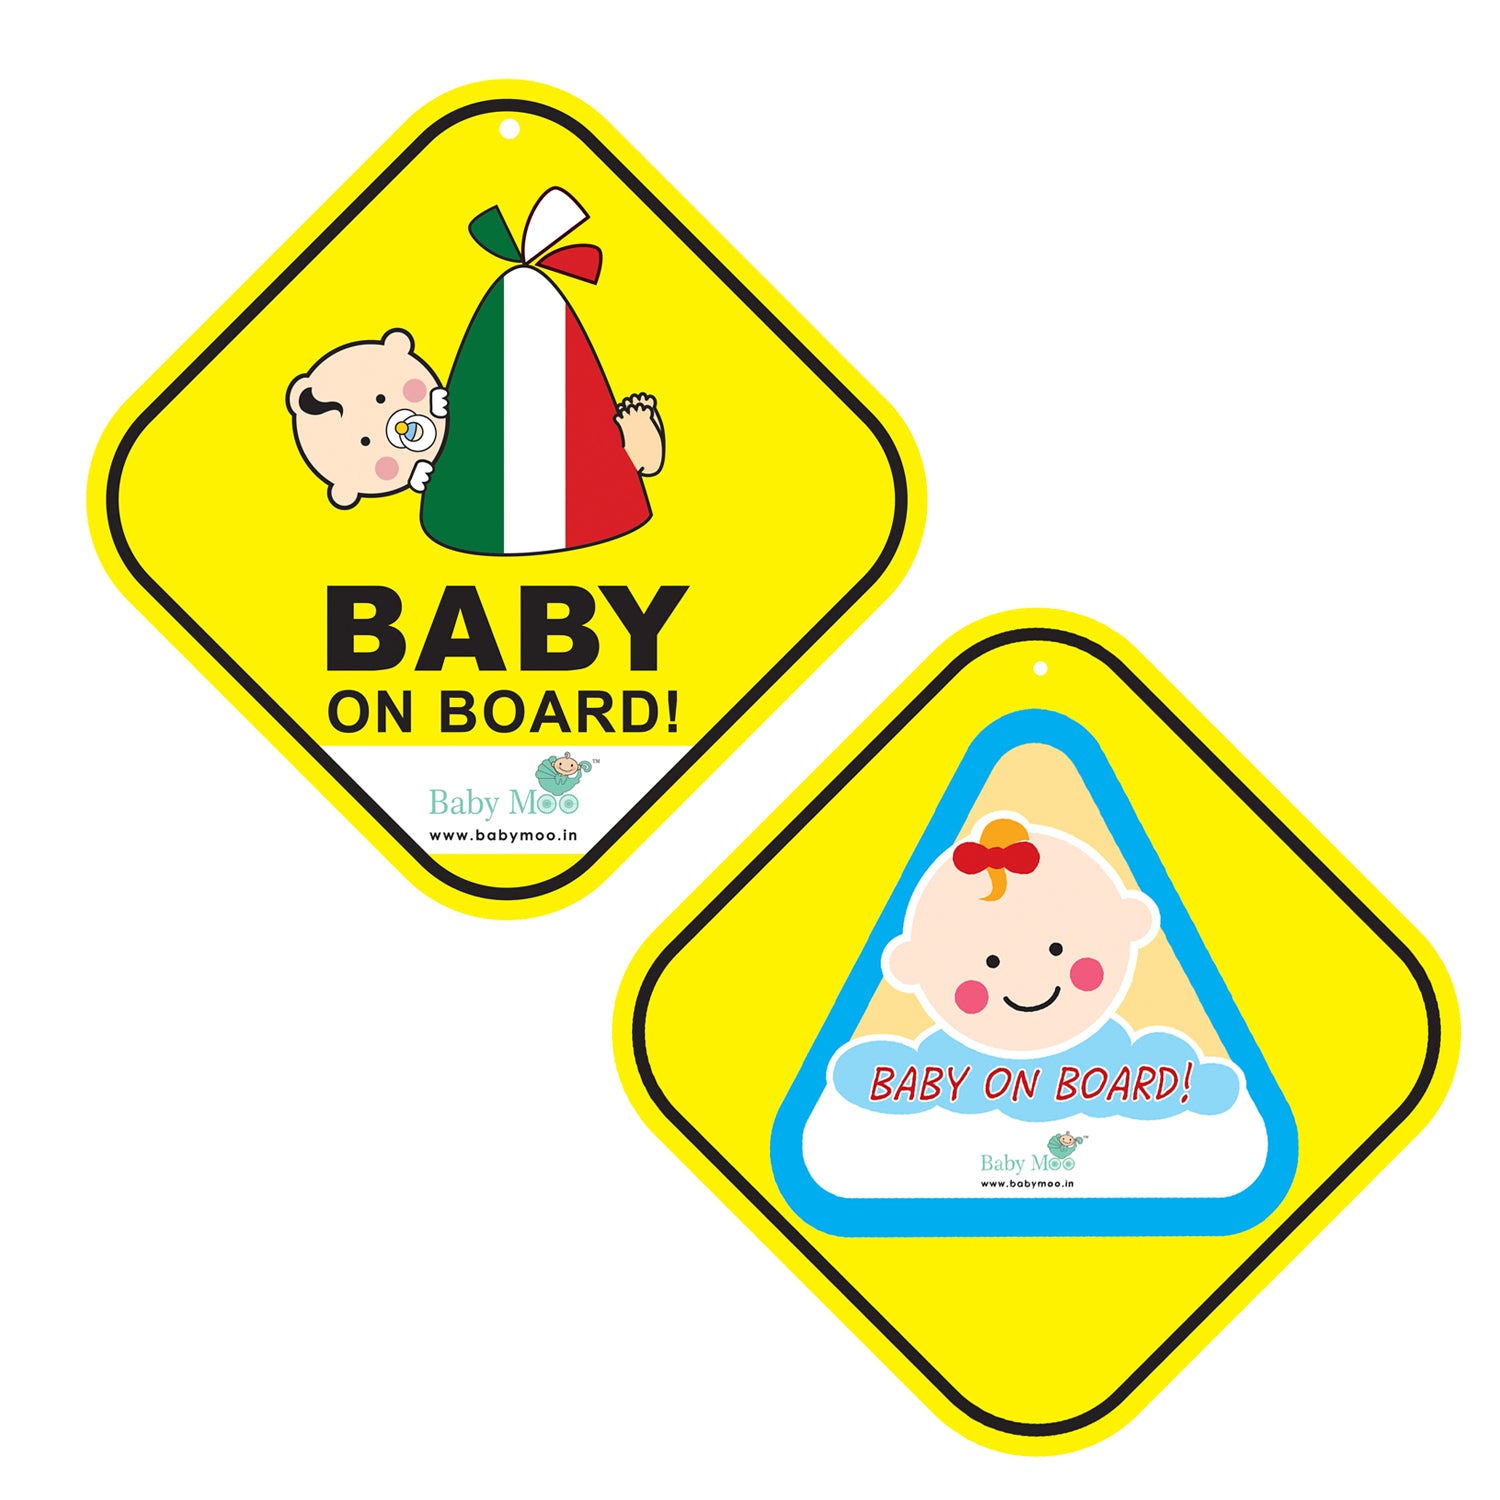 Baby Moo Car Safety Sign Sleeping Baby On Board With Suction Cup Clip 2 Pack - Yellow, Blue - Baby Moo